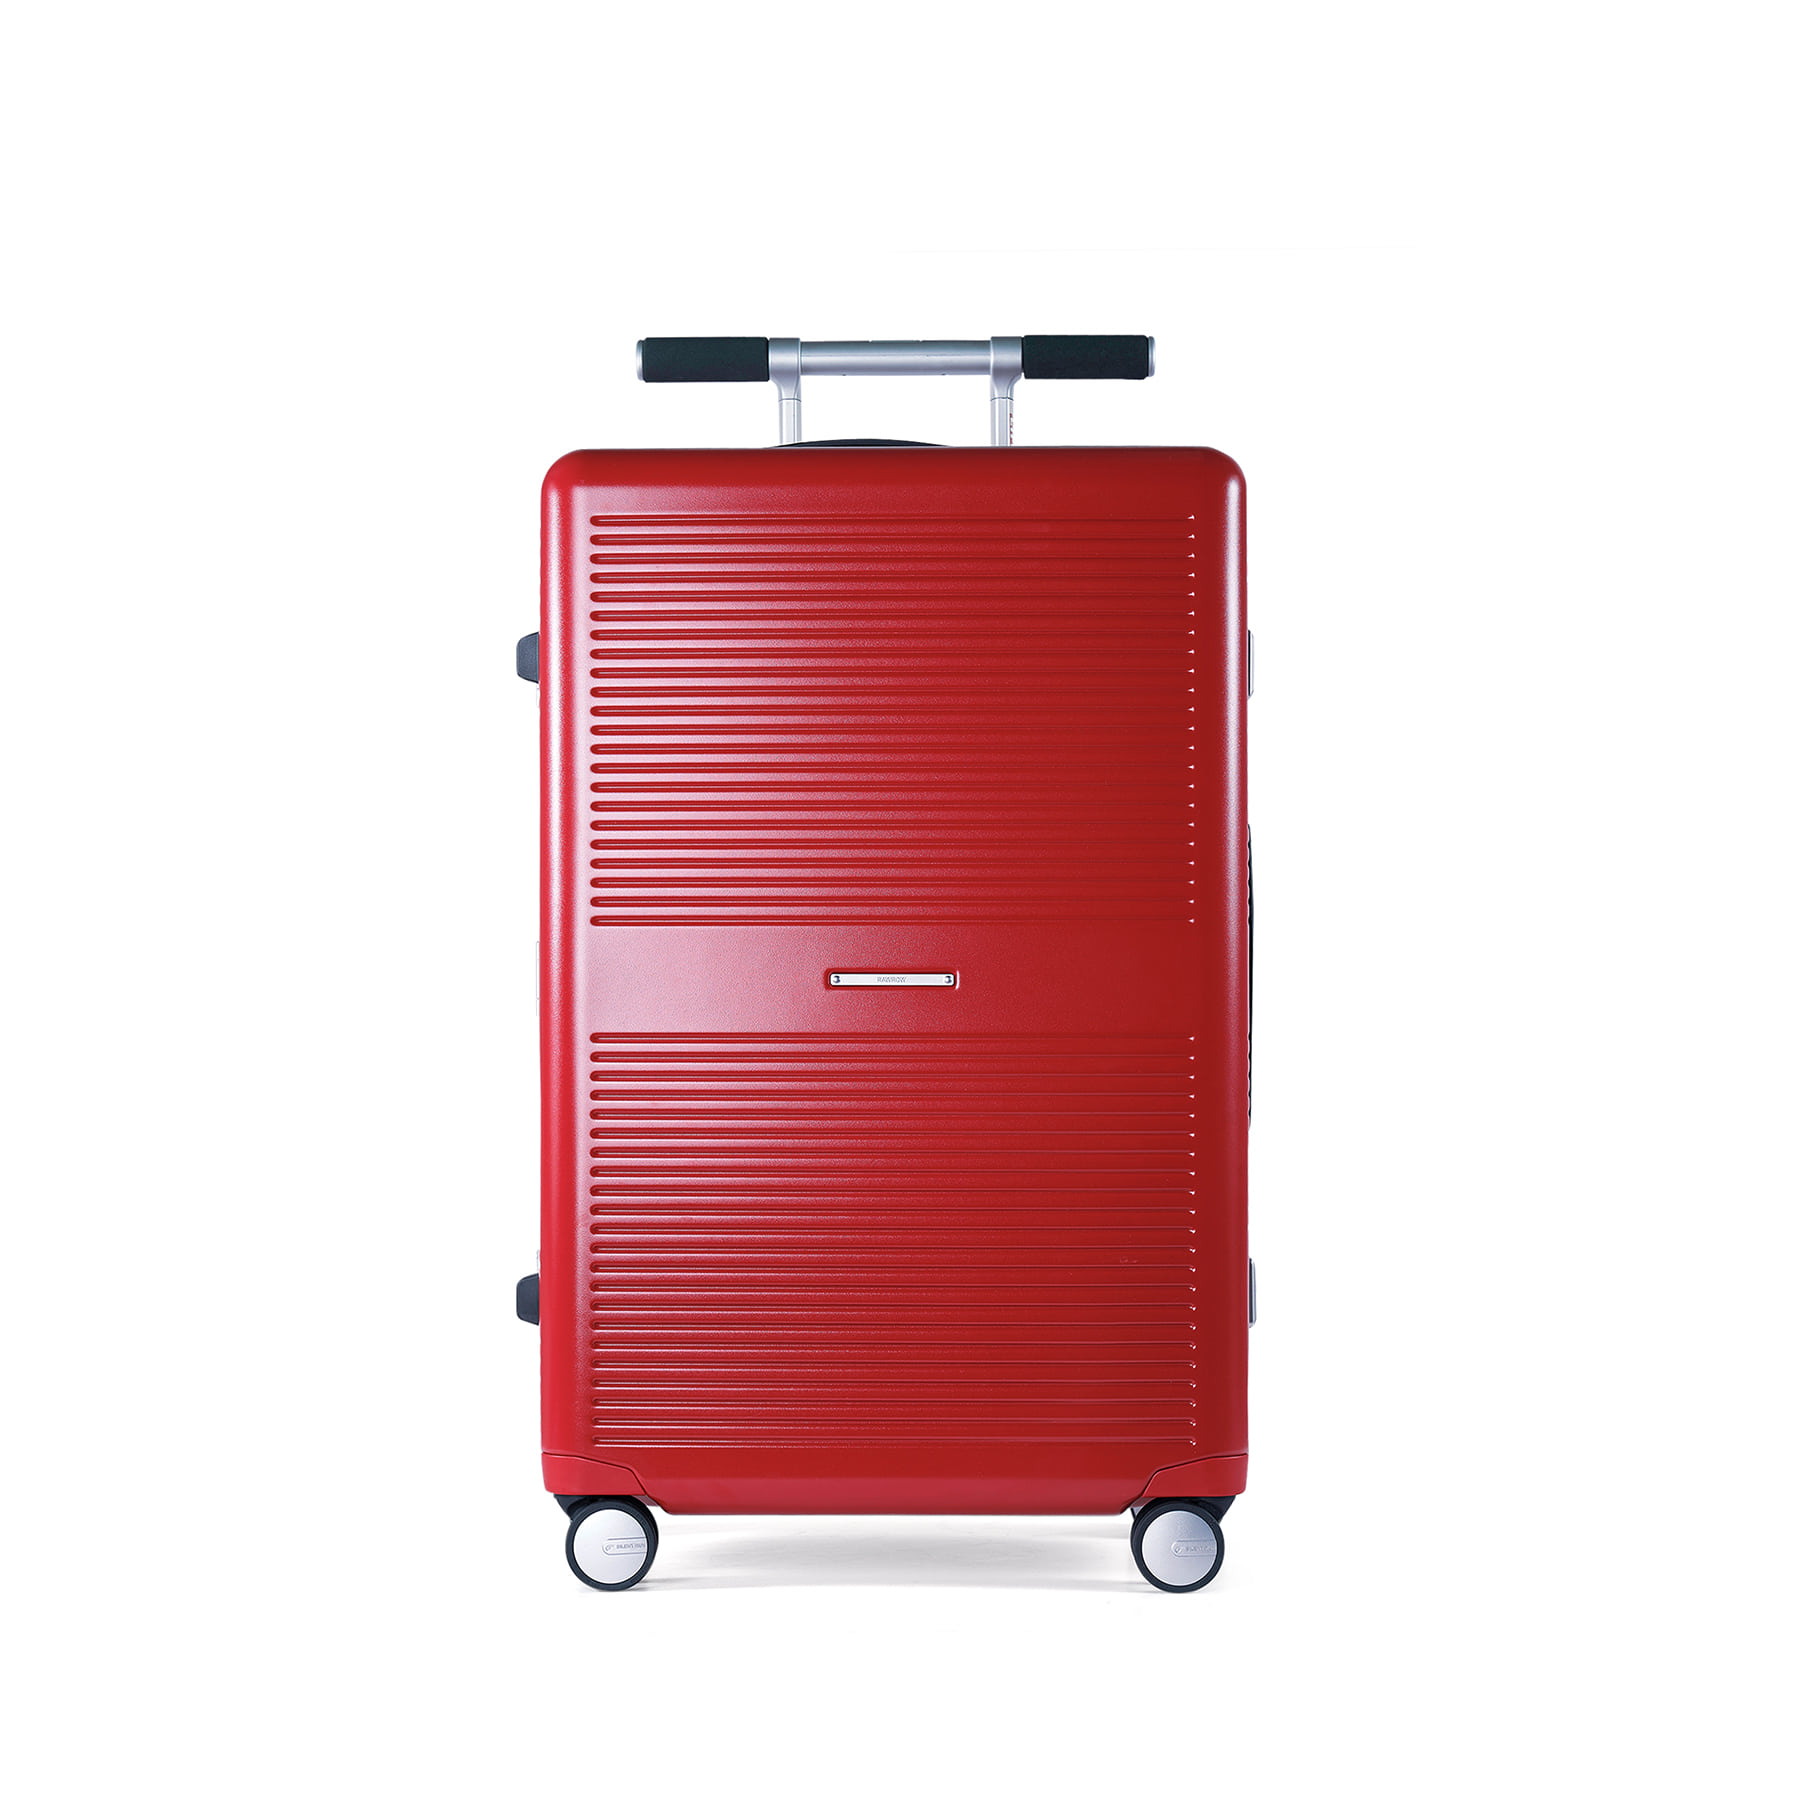 R TRUNK FRAME 88L LIFE RED